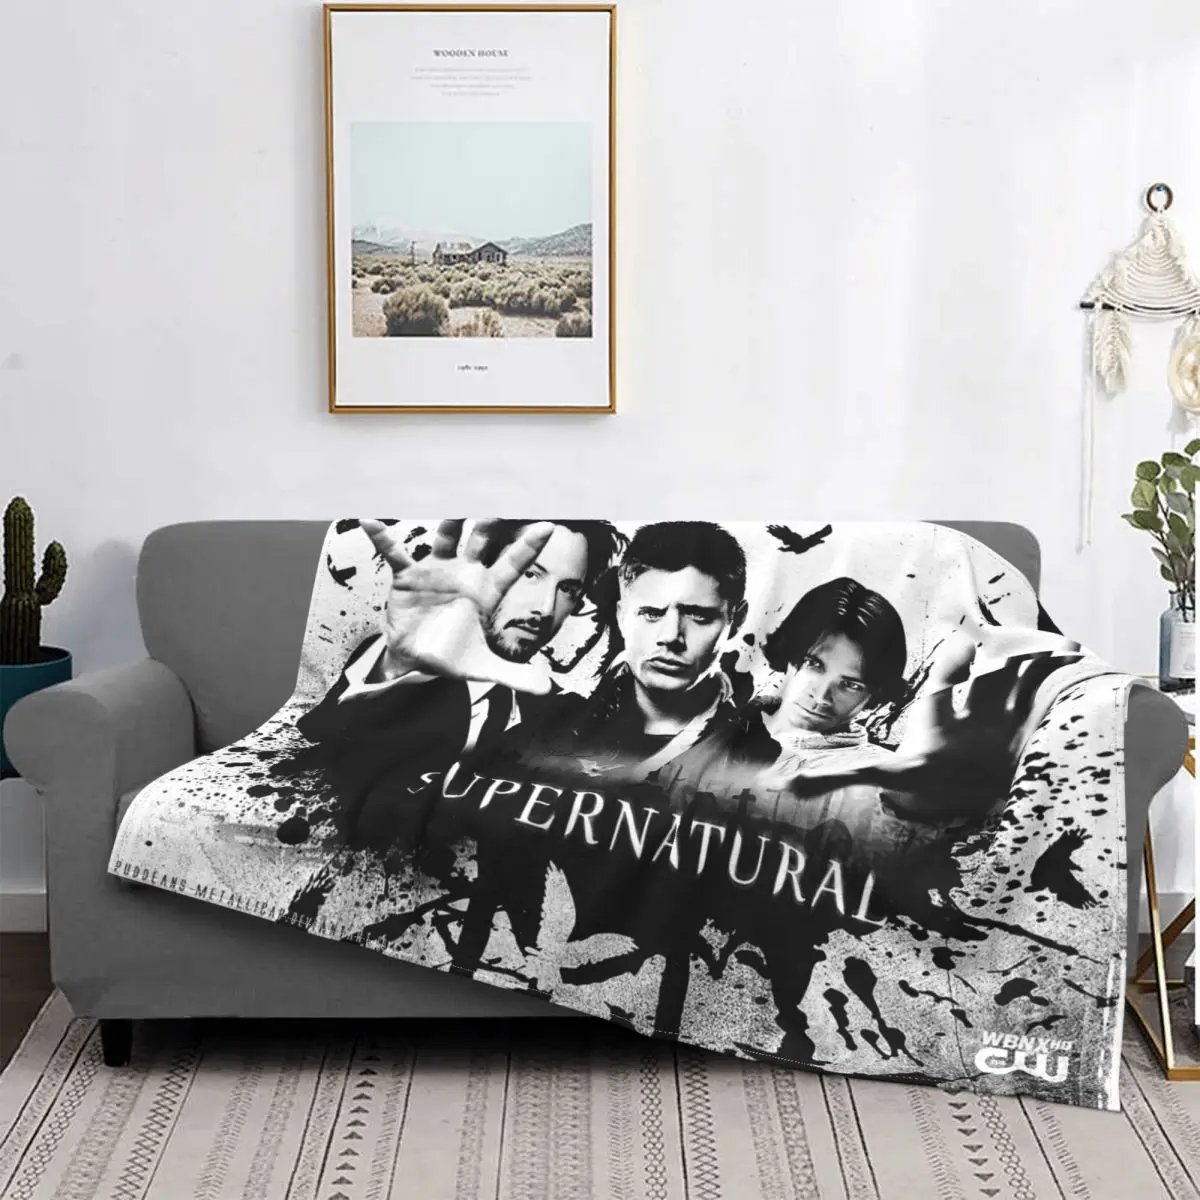 

Supernatural Horror Movie Flannel Blanket Sam Winchester Dean Winchester Castiel Funny Throw Blankets for Home Hotel Sofa